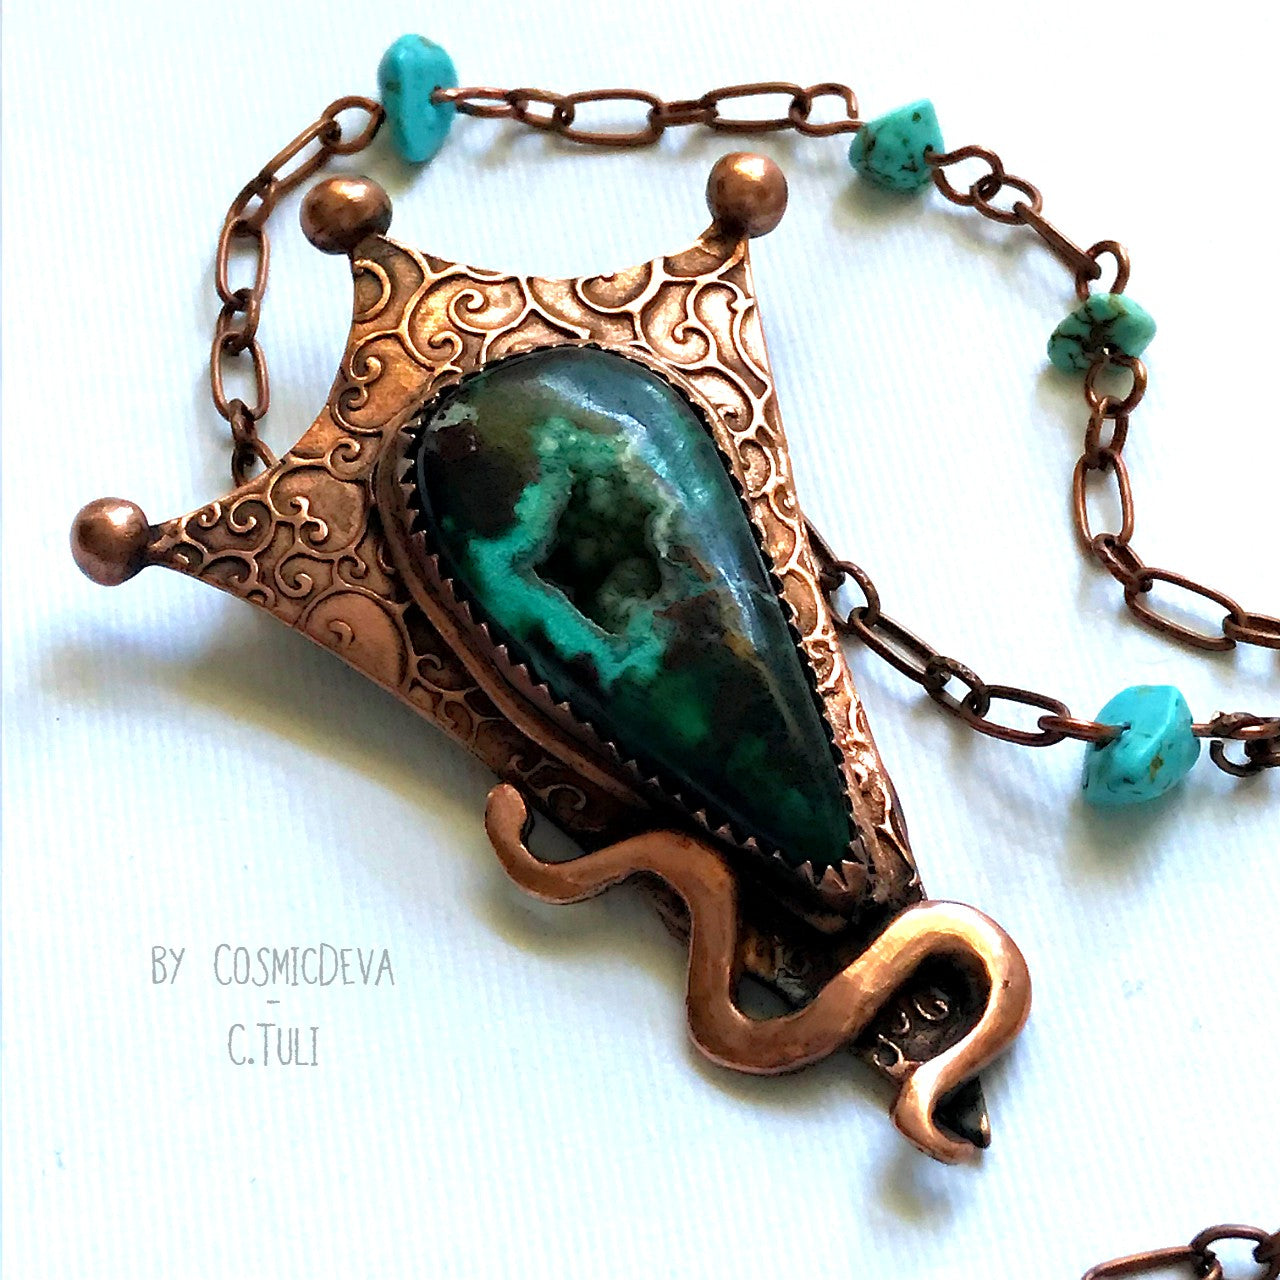 Botryoidal Chrysocolla Copper Snake Pendant Necklace This unique Chrysocolla with Malachite and traces of cuprite gemstone is nestled amidst a complete hand sculptured triangle pendant with a little snake winding up in rich and warm glowing copper and has beautiful swirl texture. This rustic copper statement necklace suspends from a copper chain with natural turquoise beads. The copper jewelry piece was oxidized for a deep warm finish.- CosmicDeva